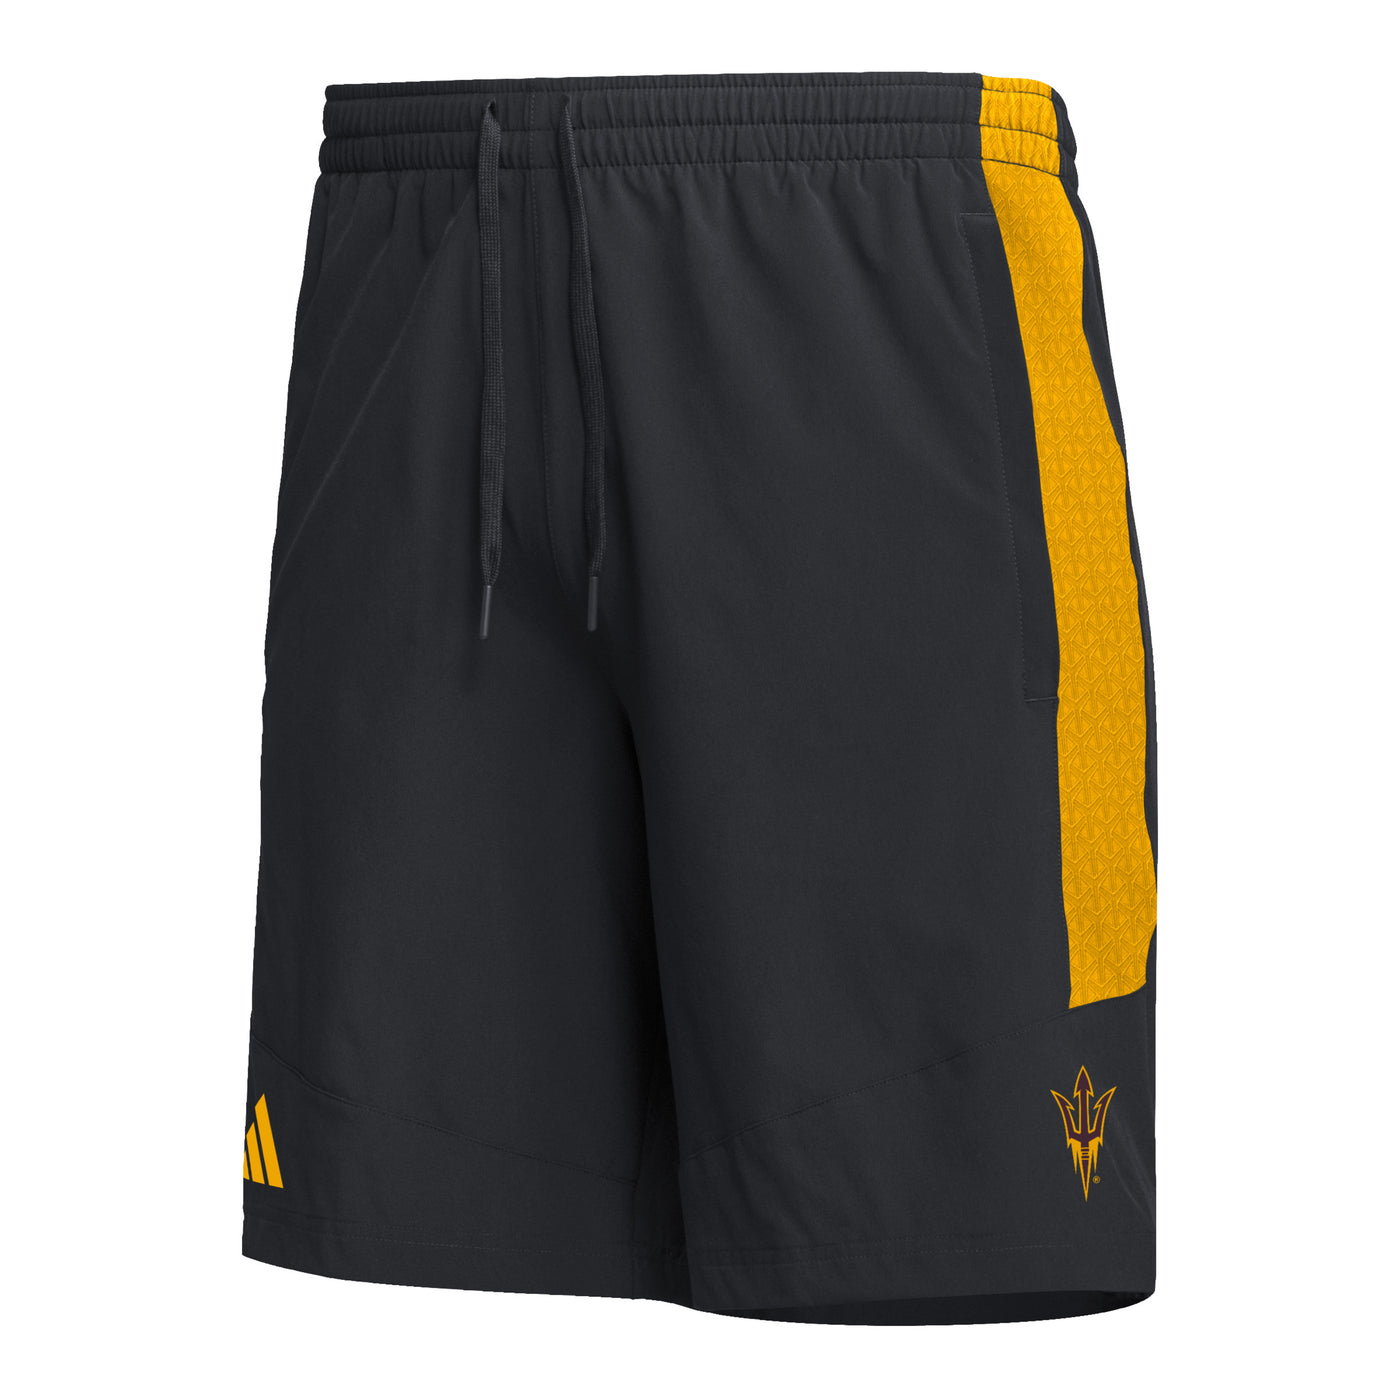 ASU black wind-breaker shorts with gold stipe down the side and a gold pitchfork logo